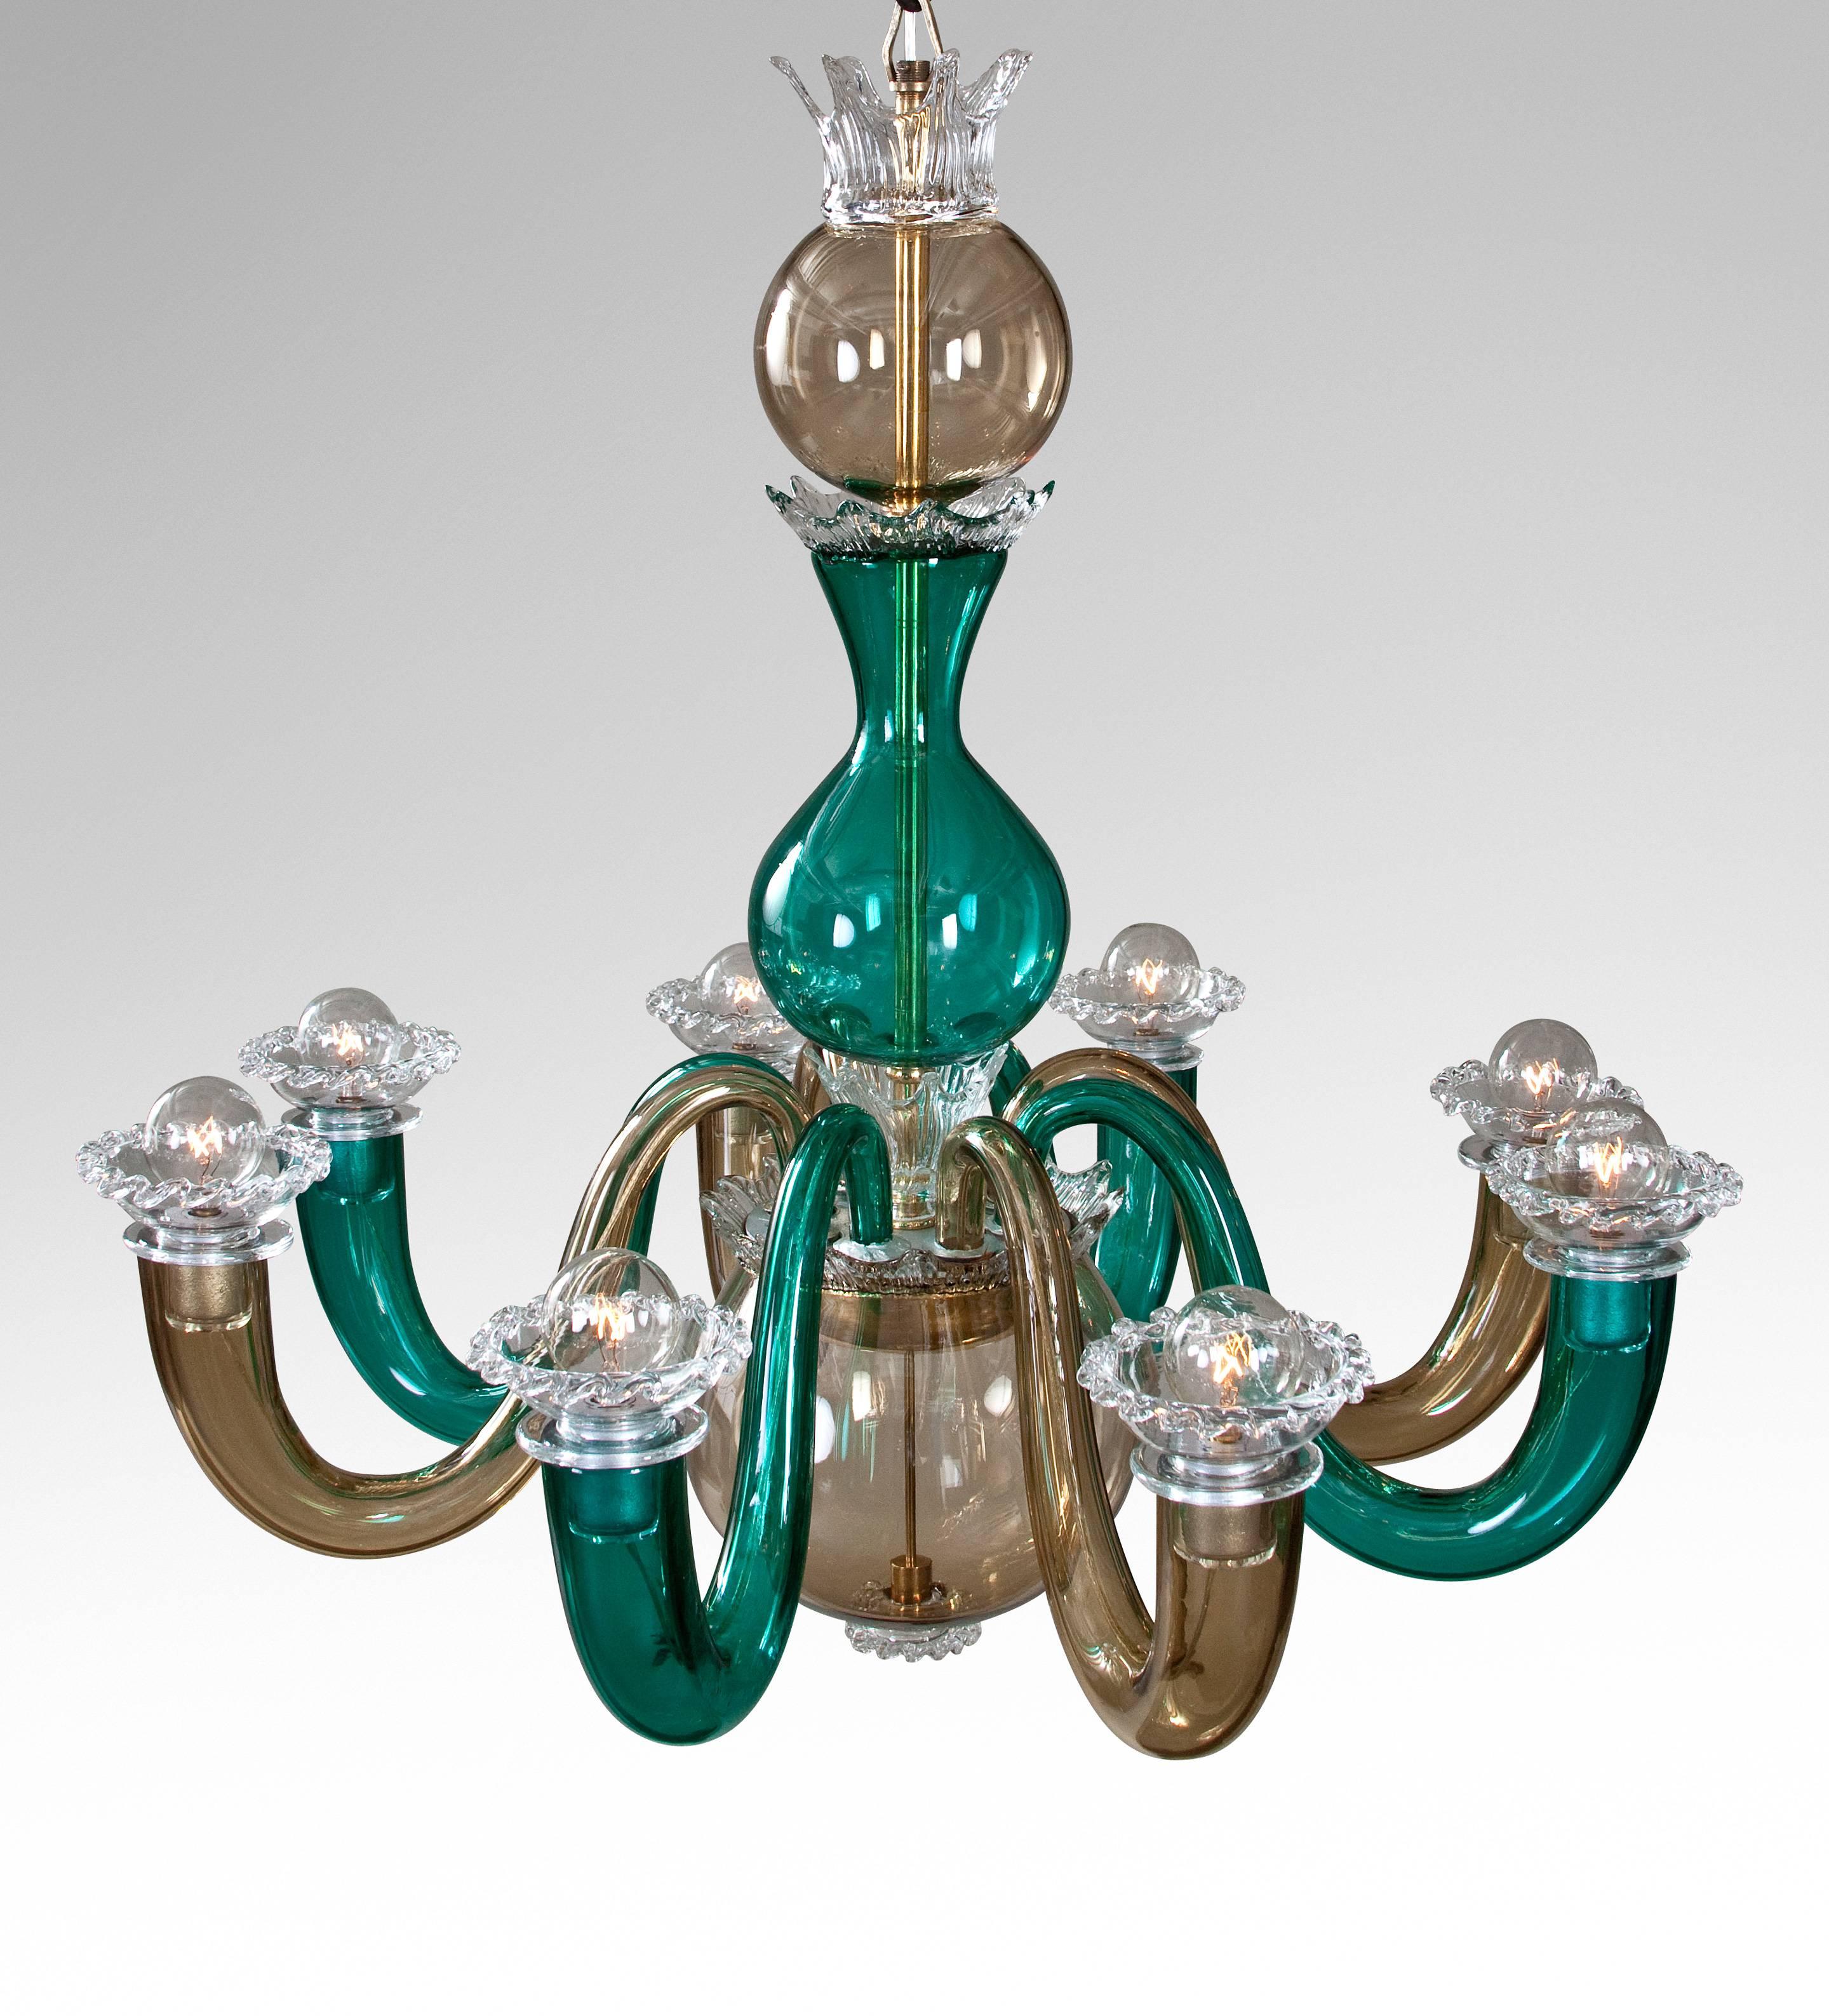 Gio Ponti for Venini, an Original Period Murano Glass 8 Arm Chandelier
A classic Ponti design in rarely seen color combination, a very attractive chandelier. The baluster and spherical standard adorned in a series of crowns, issuing 8 s-shaped arms,